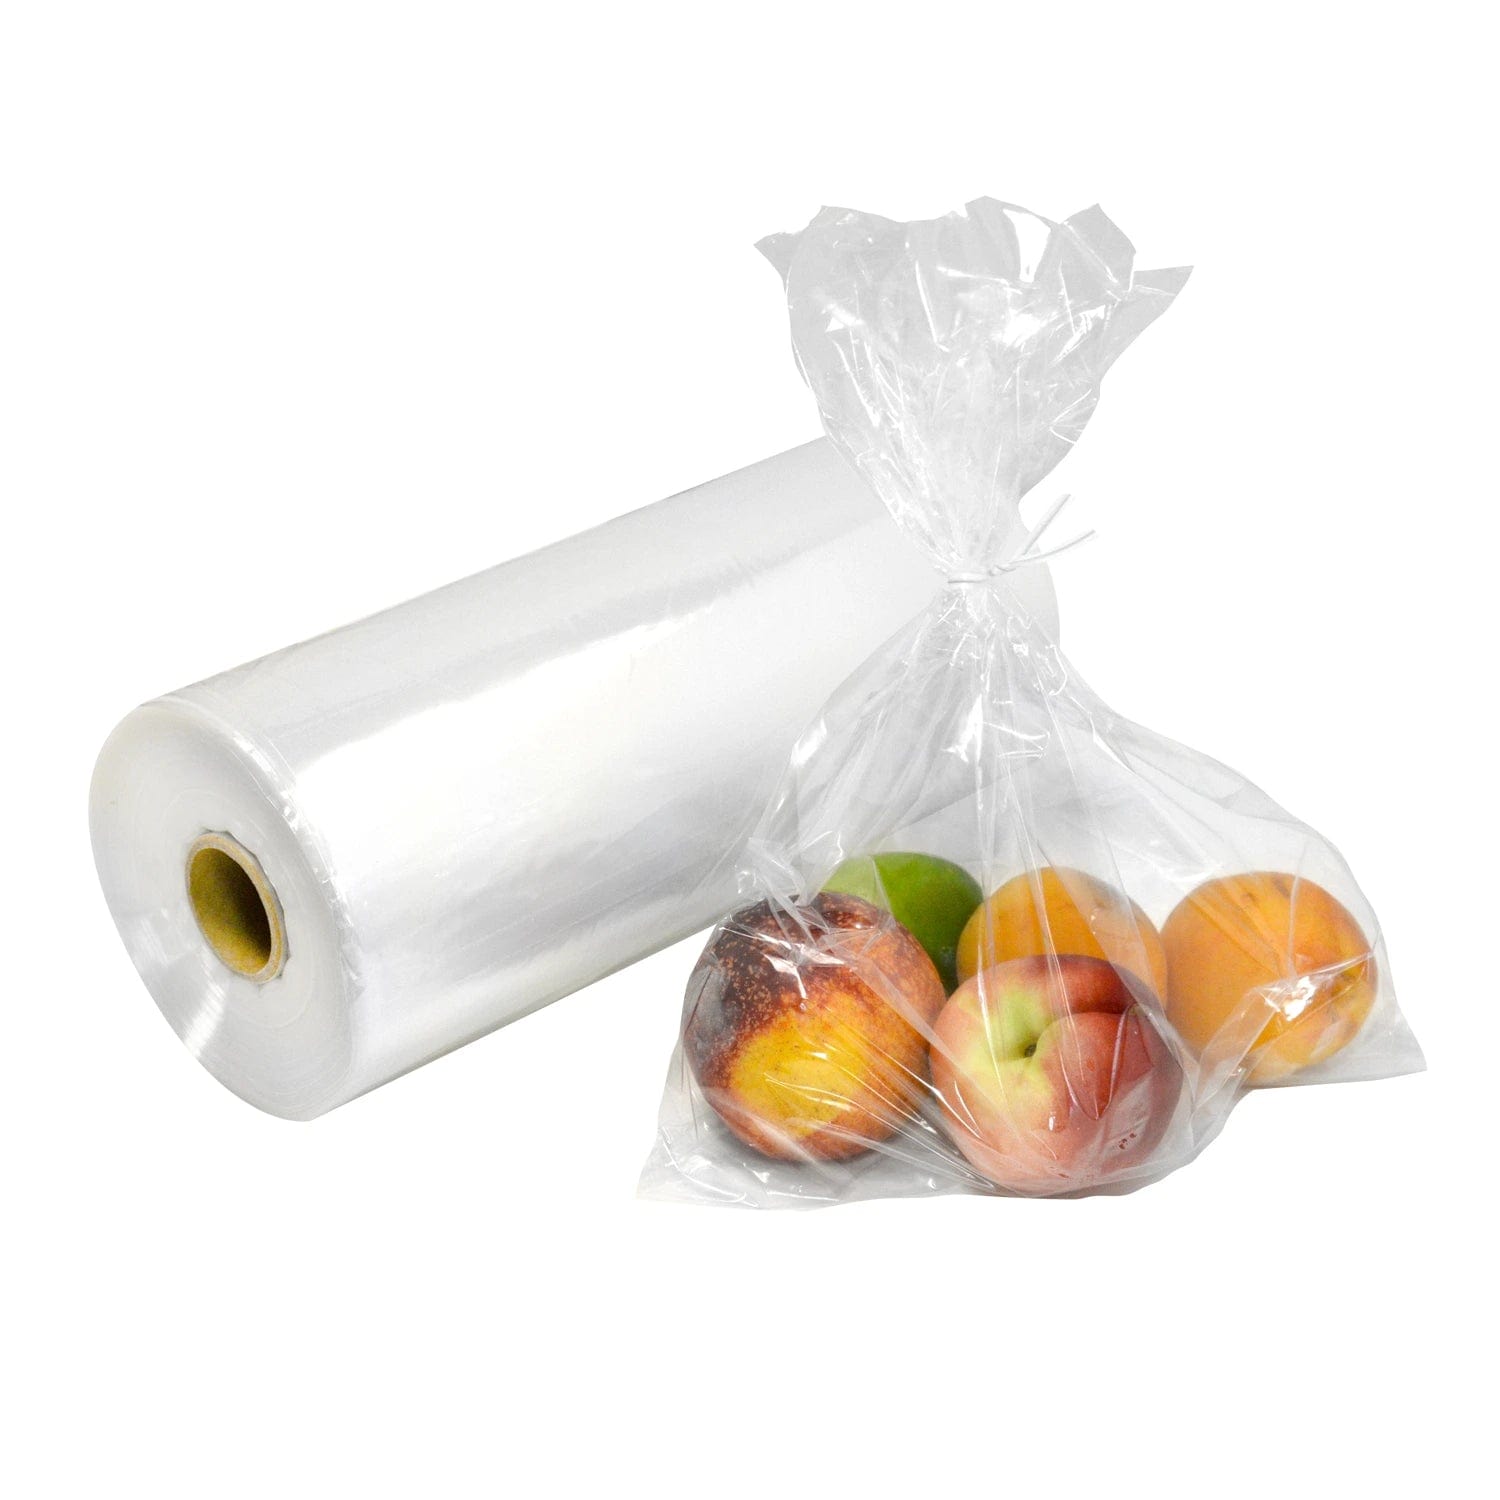 Delicious and Nutritious Produce Rolls for Every Occasion